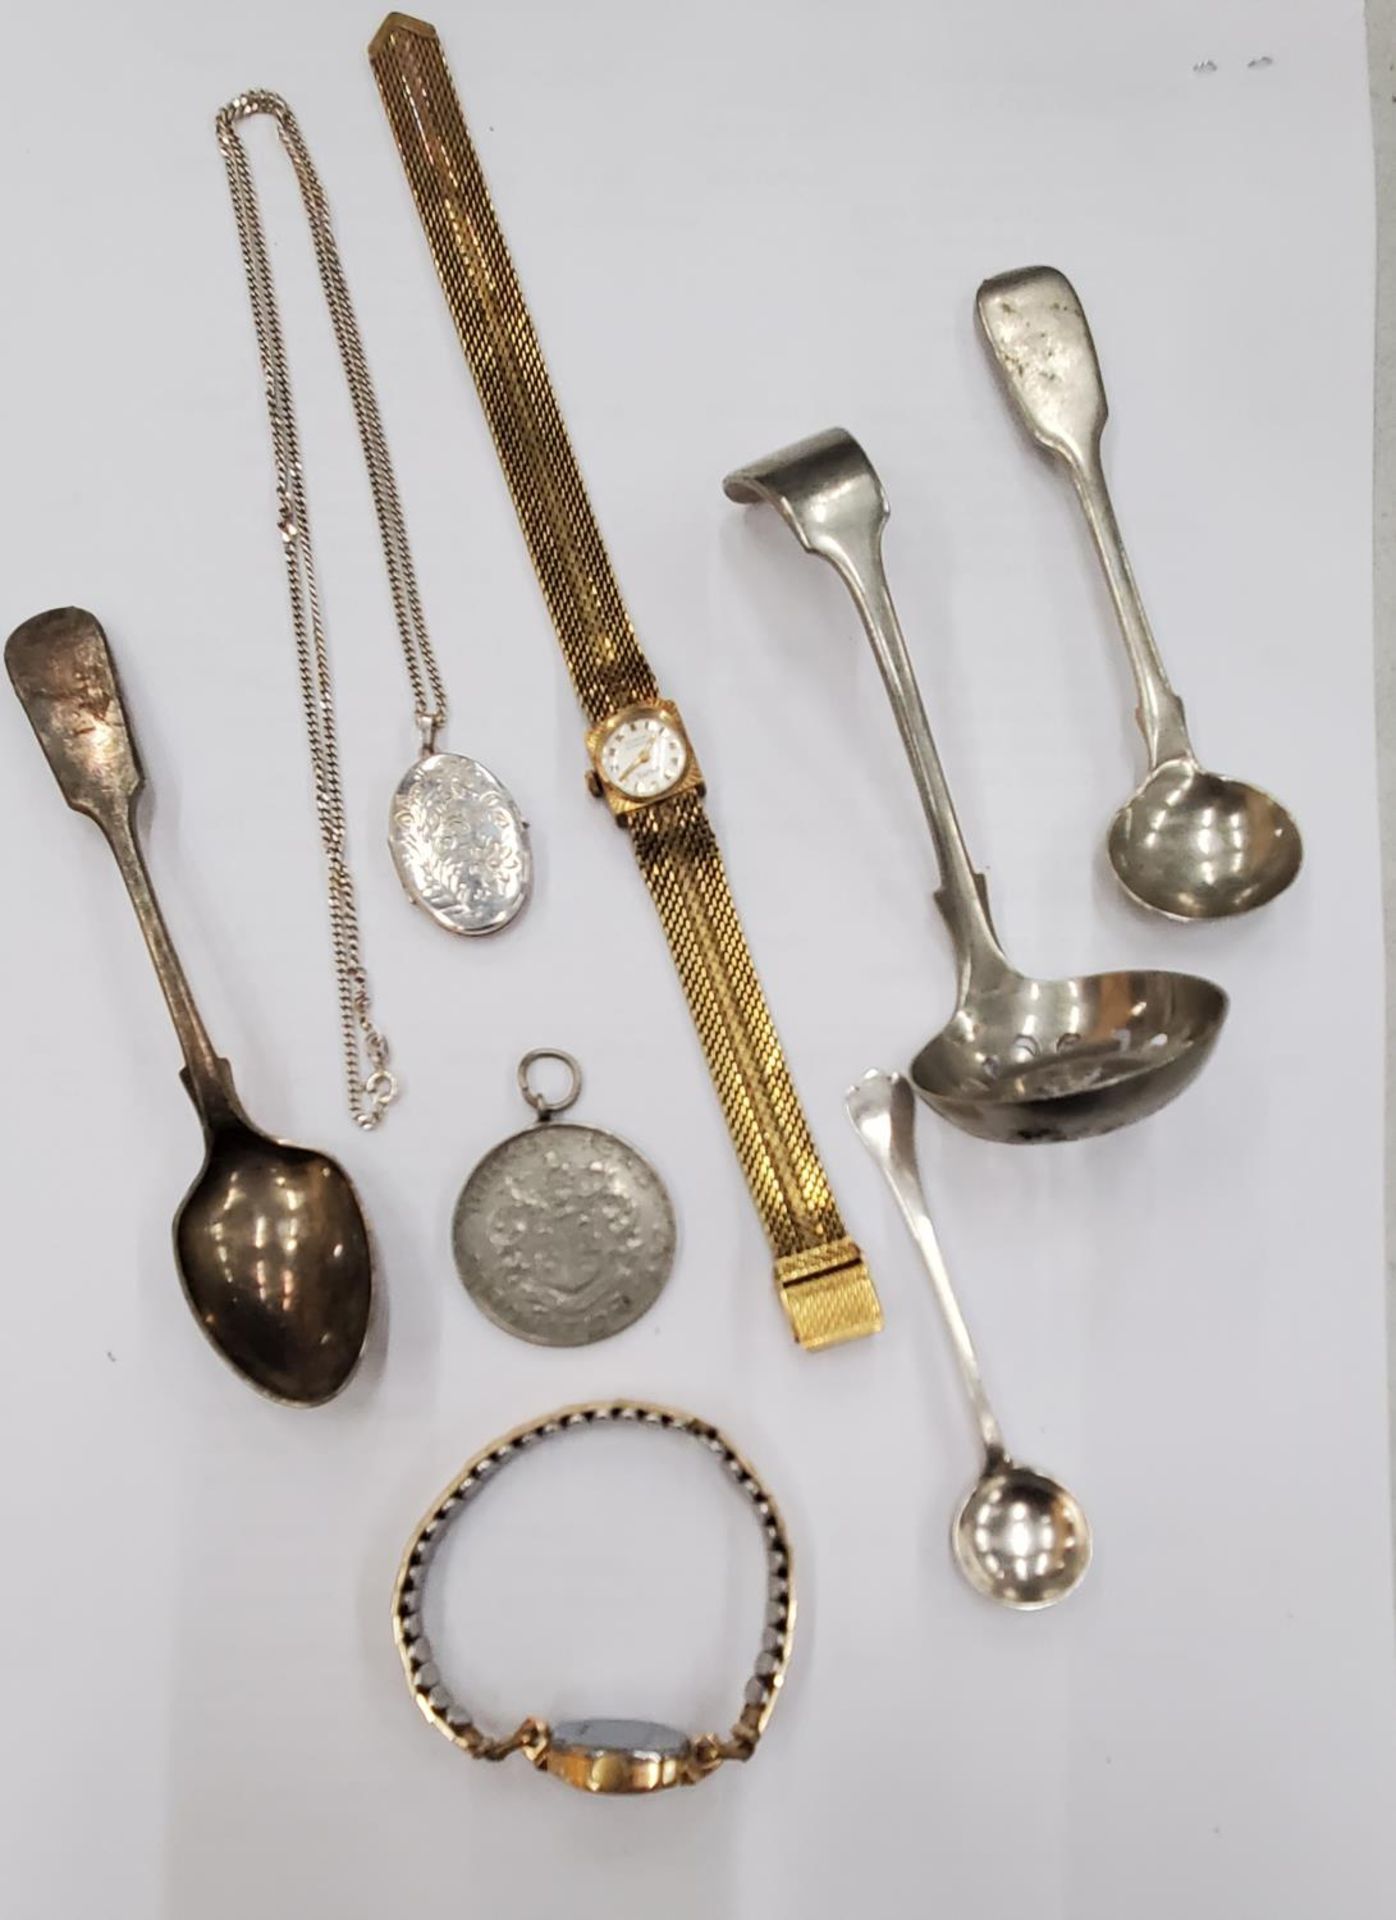 A SILVER LOCKET AND CHAIN, TWO VINTAGE LADIES WRISTWATCHES, FLATWARE, A KING GEORGE VI CORONATION